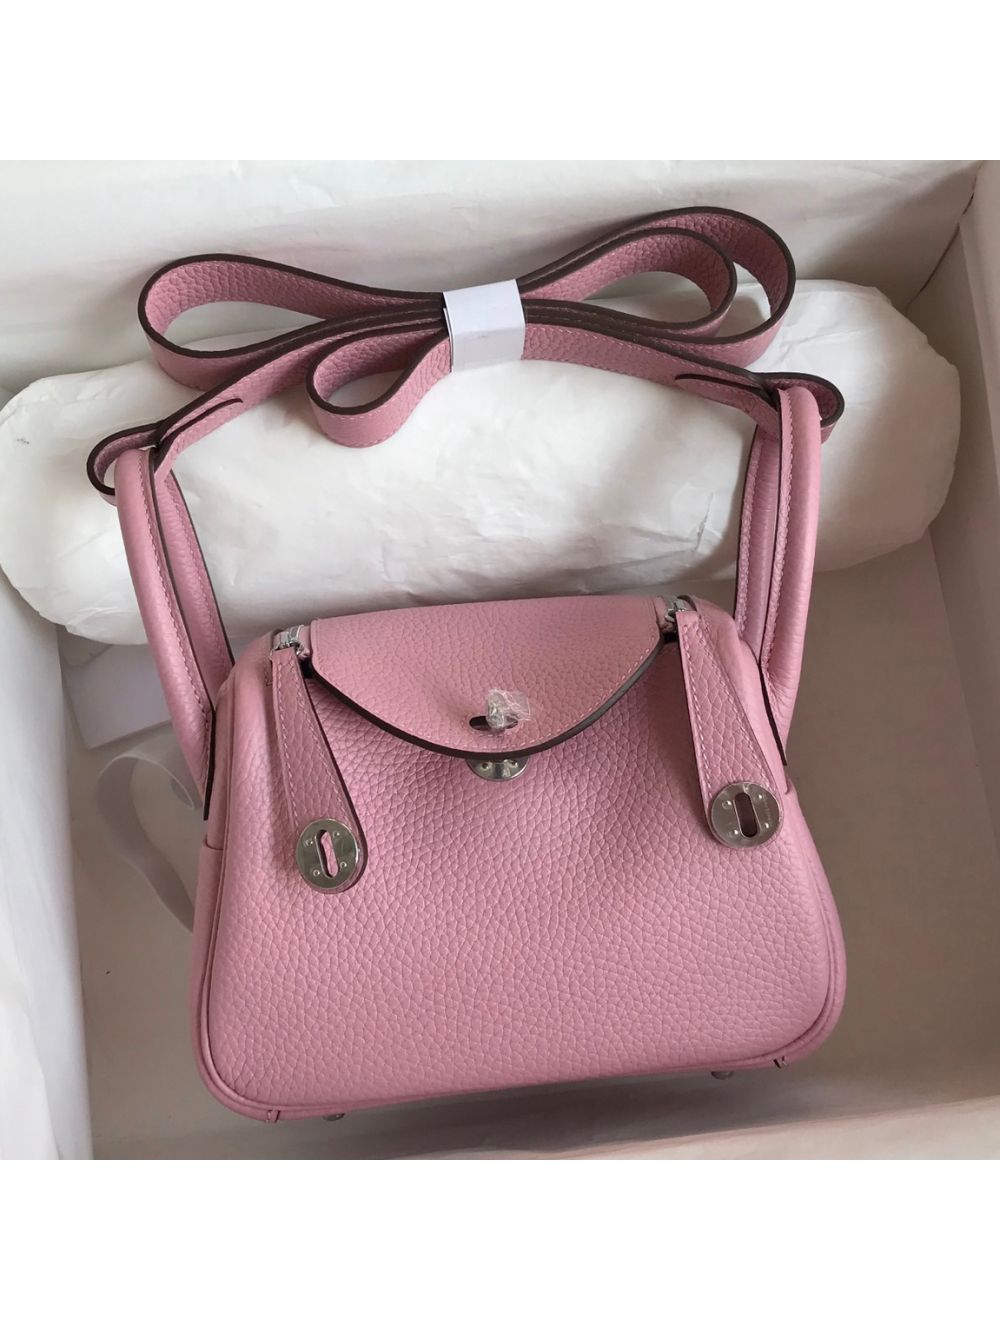 Hermes Mini Lindy Bag In Pink Clemence Leather 